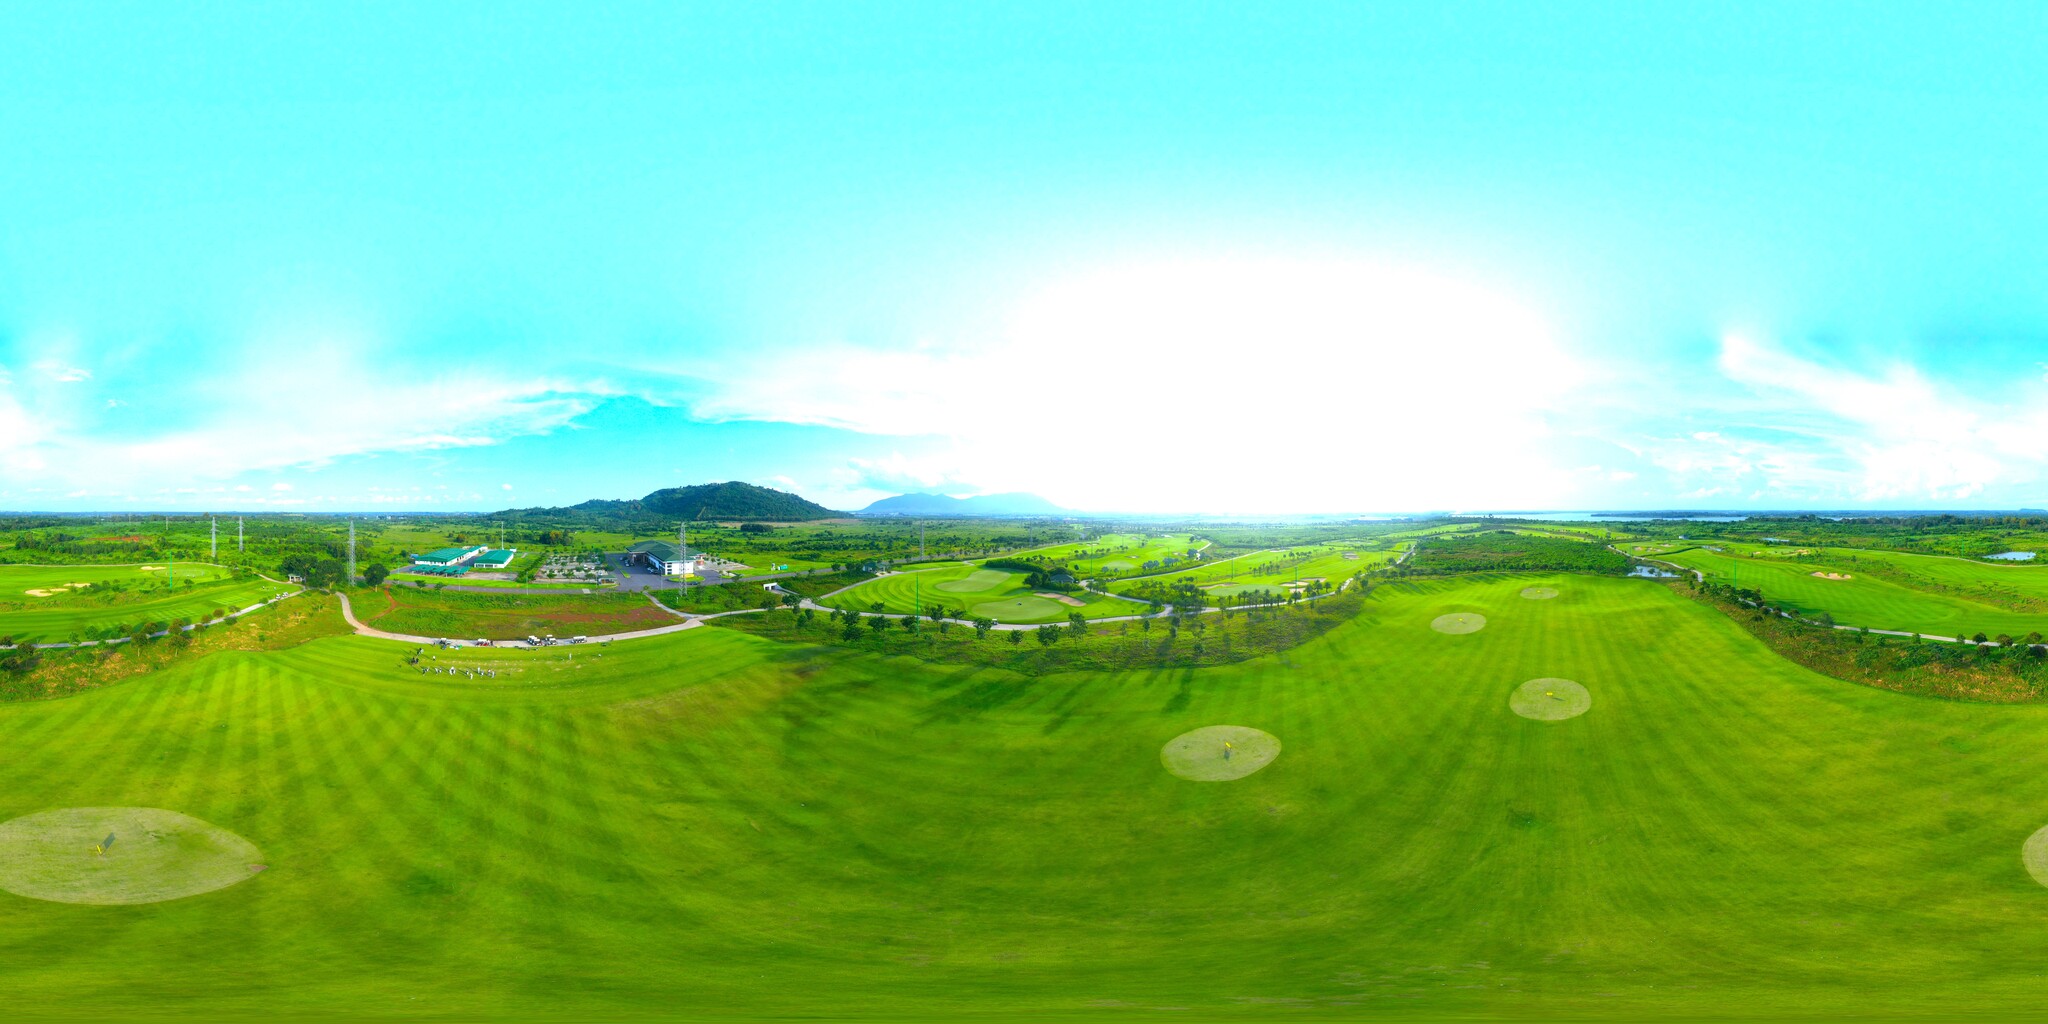 Chau Duc Golf Course increases the value for customers of industrial parks and golfers